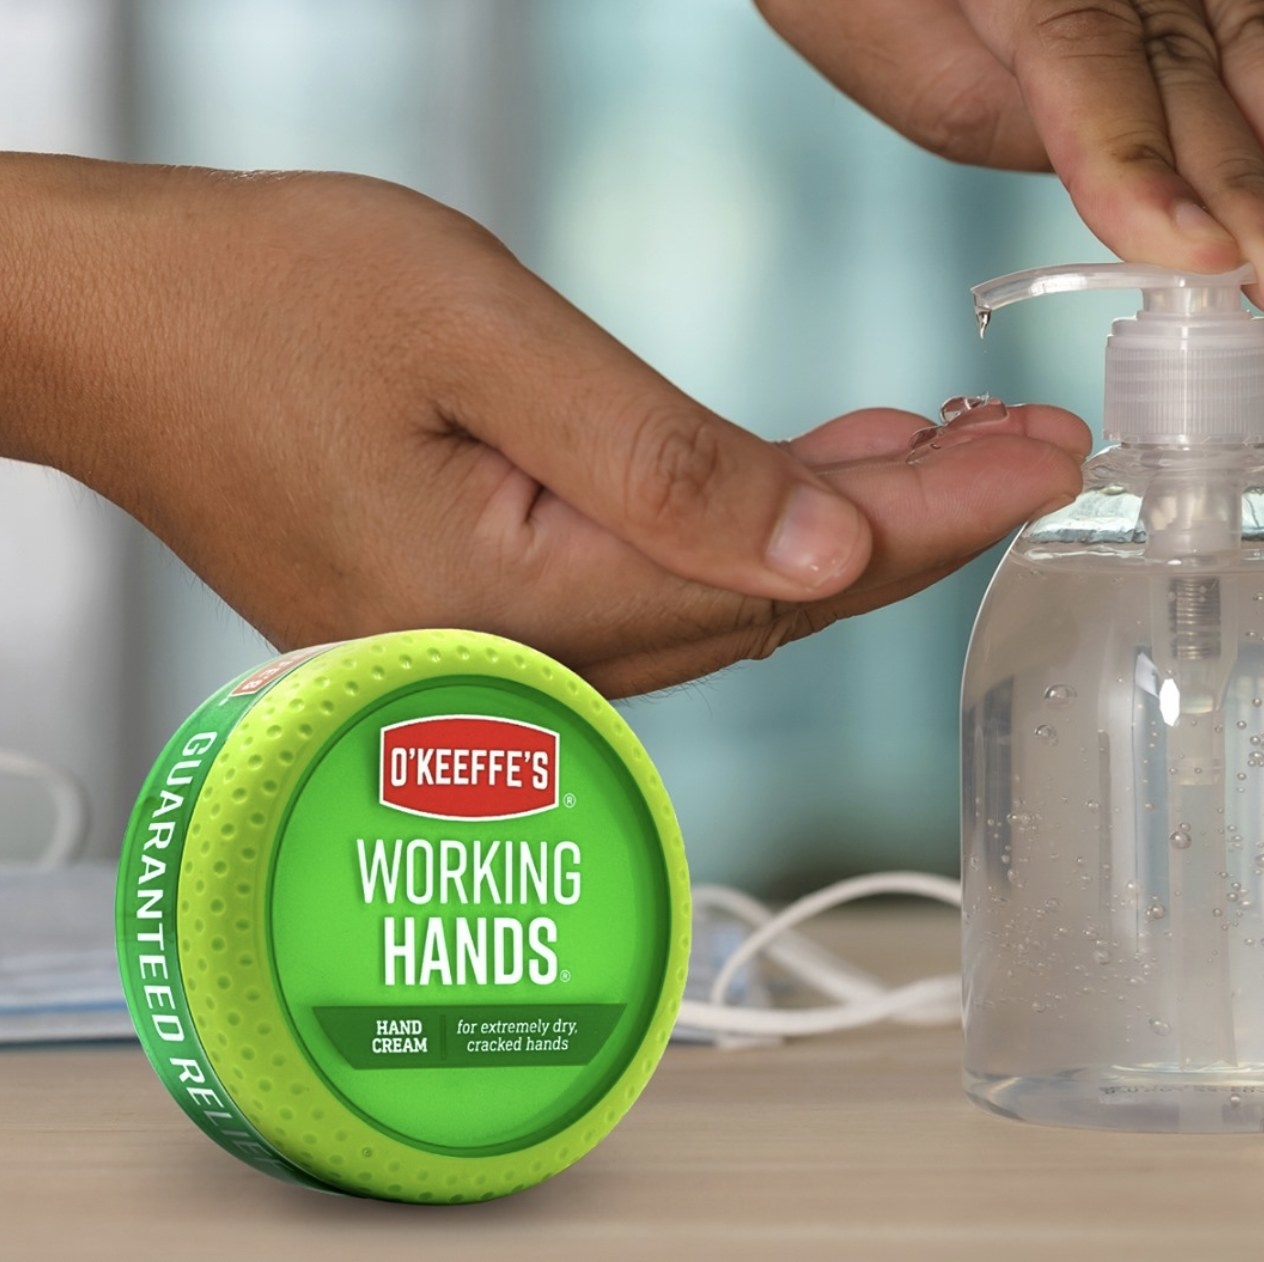 A person pumping hand sanitizer with a jar of hand cream.